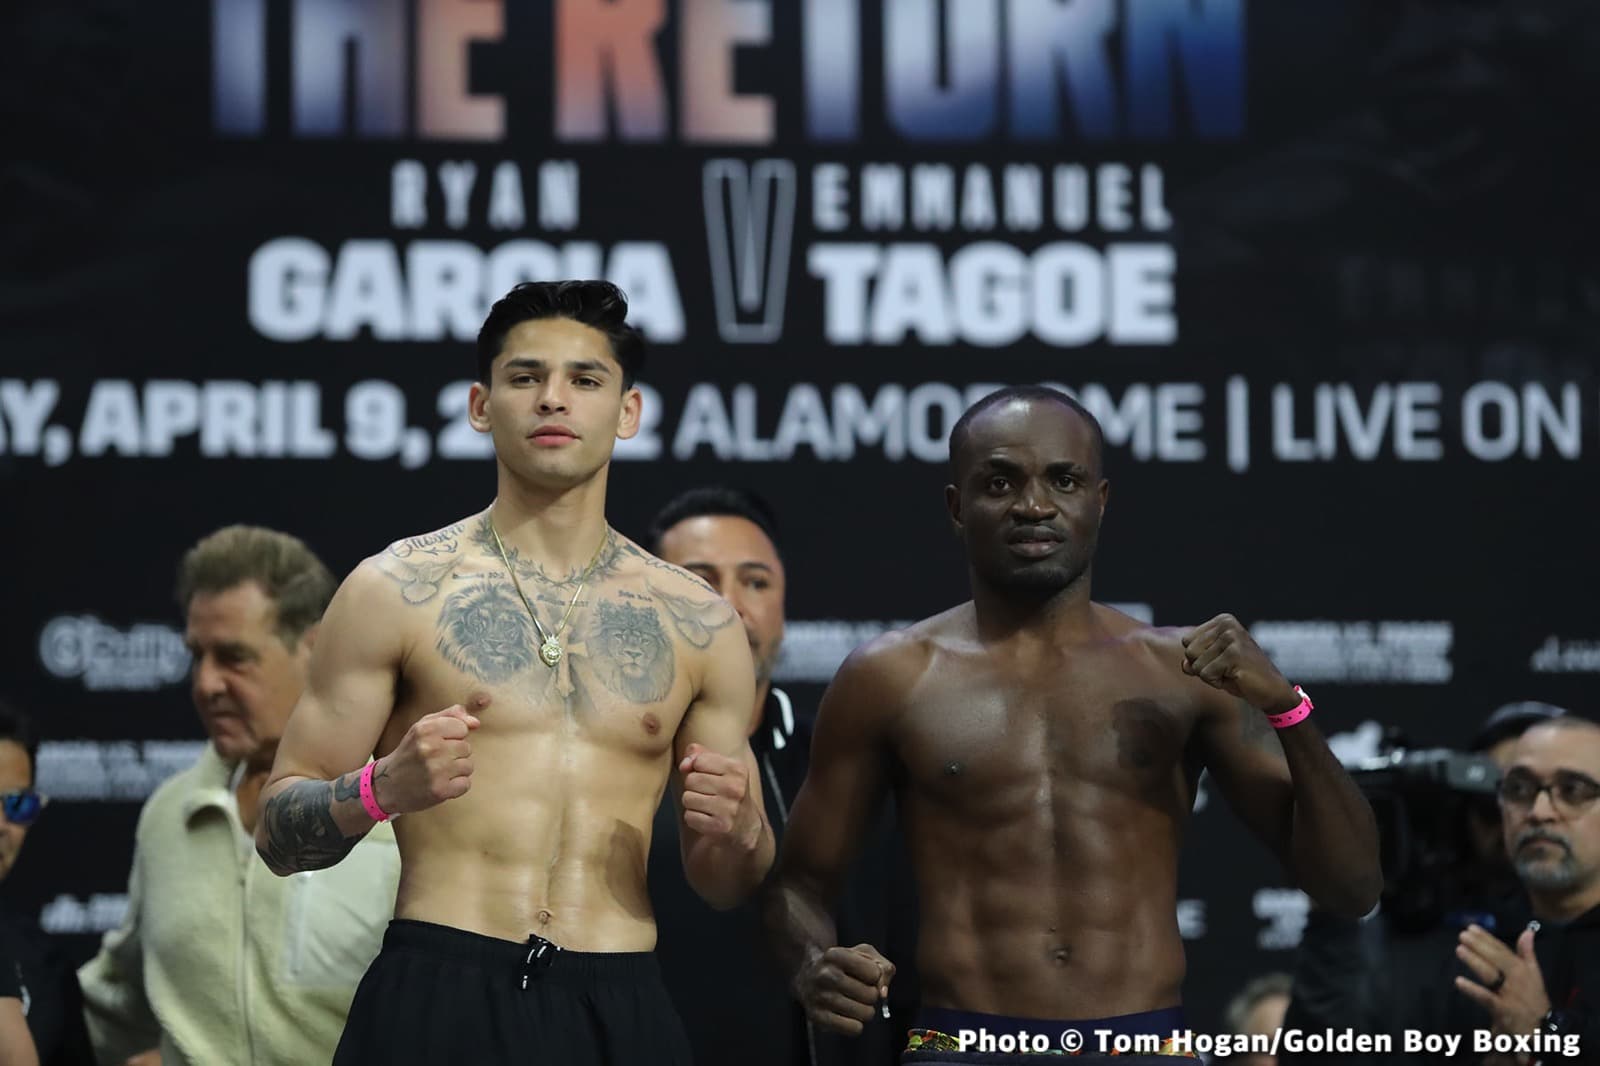 Image: Garcia vs Tagoe Official DAZN Weights & Photos